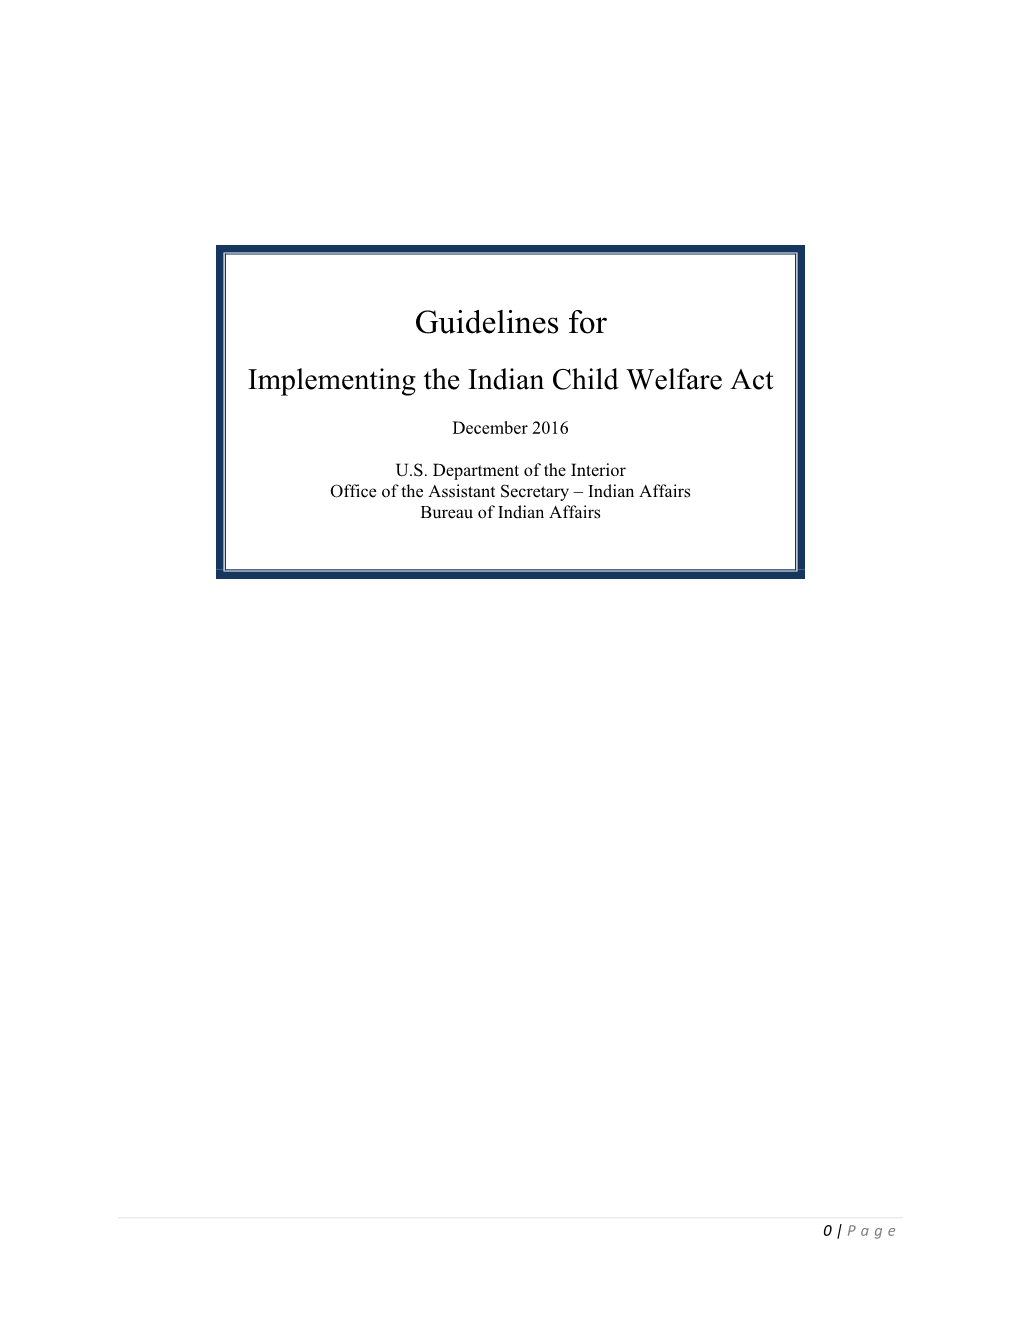 Guidelines for Implementing the Indian Child Welfare Act